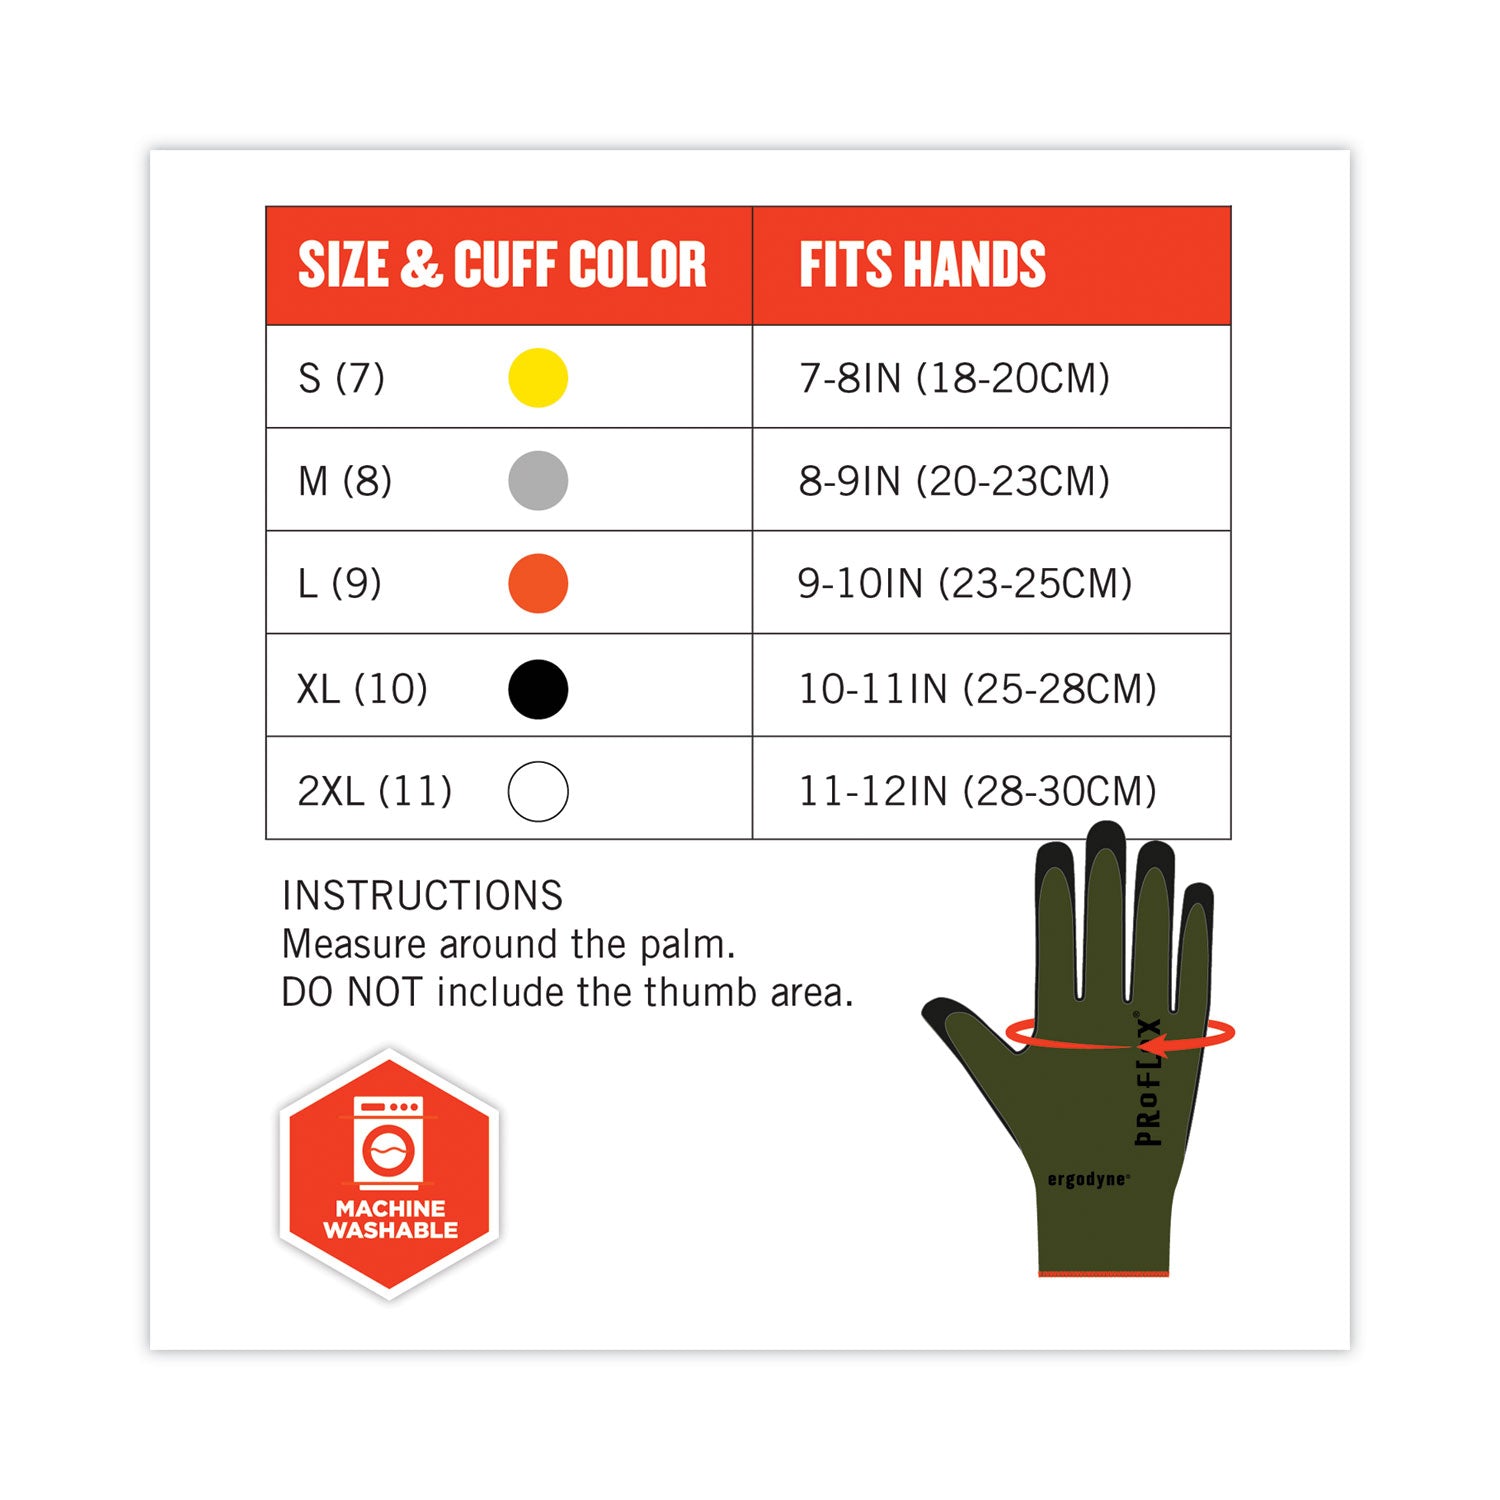 proflex-7042-ansi-a4-nitrile-coated-cr-gloves-green-medium-pair-ships-in-1-3-business-days_ego10343 - 8